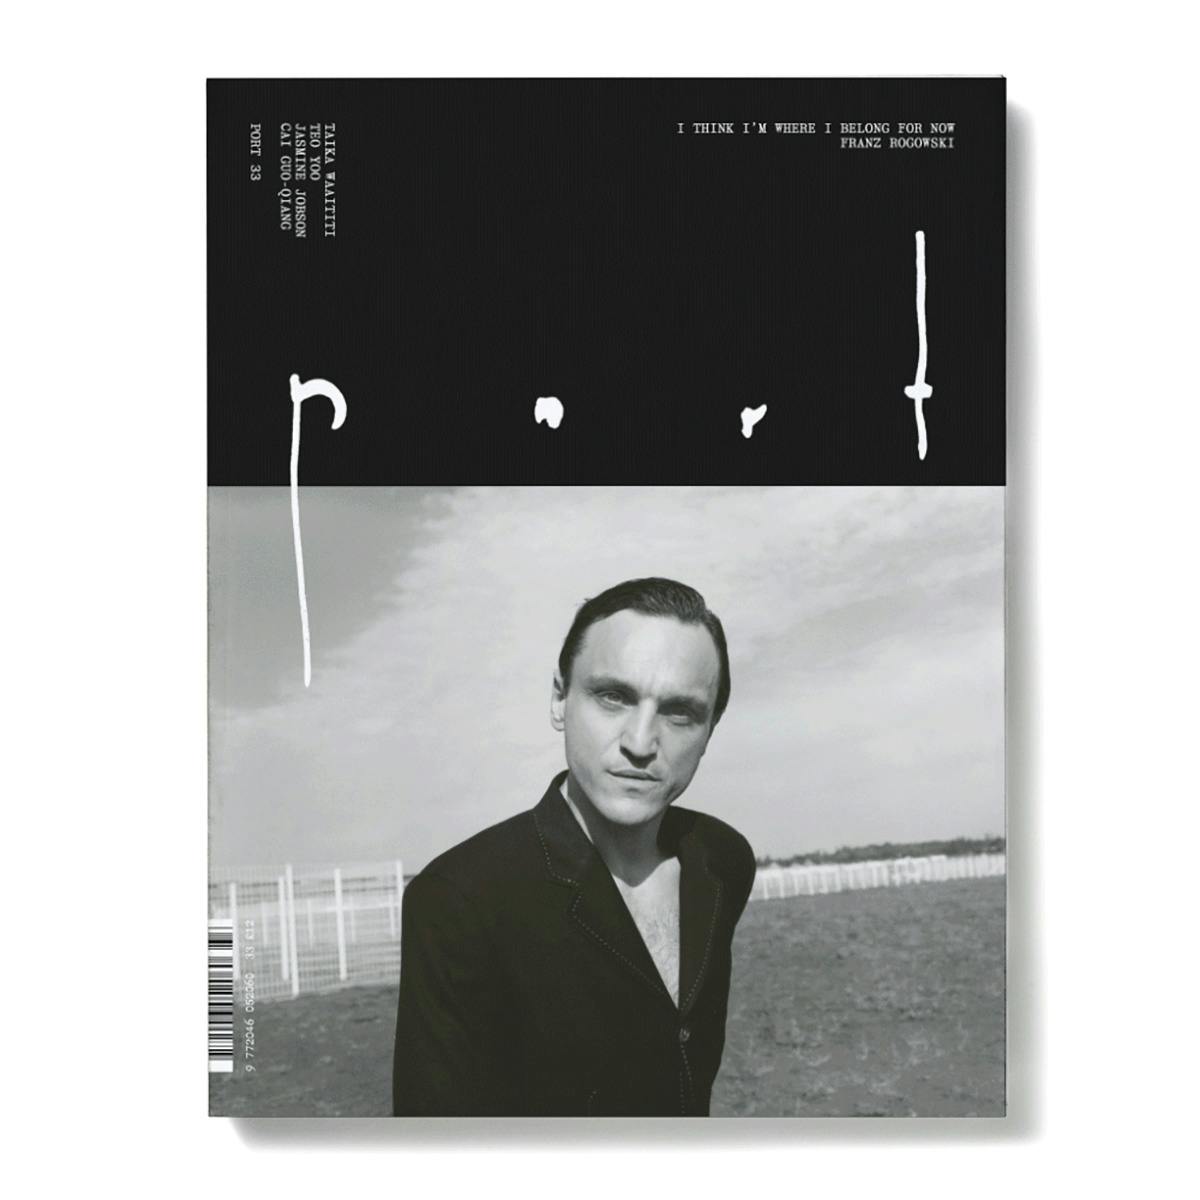 Photo of the cover of Port magazine with the masthead handwritten in a mix of squat and leggy letters above a black and white photo of Franz Rogowski